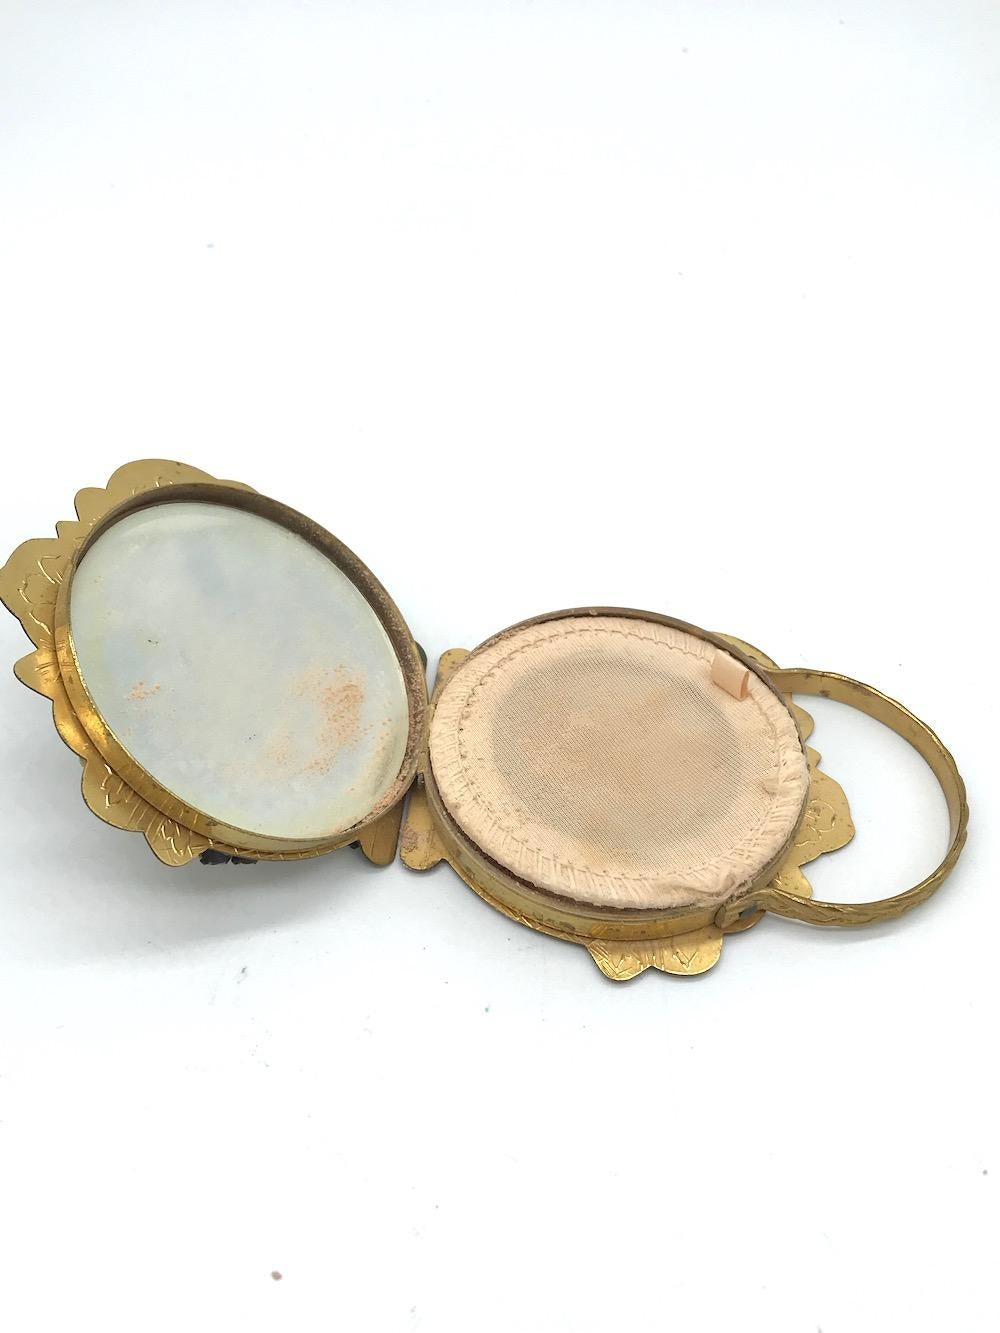 Pearl, MakeUp Compact, Flower Purse 18th Century
8 clusters of pearls on etched case above rhinestone rows set in prongs. The pearls are imitation. Circa 18th Century. Compact includes original powder puff and mirror. Brass base metal
GIA Gemologist